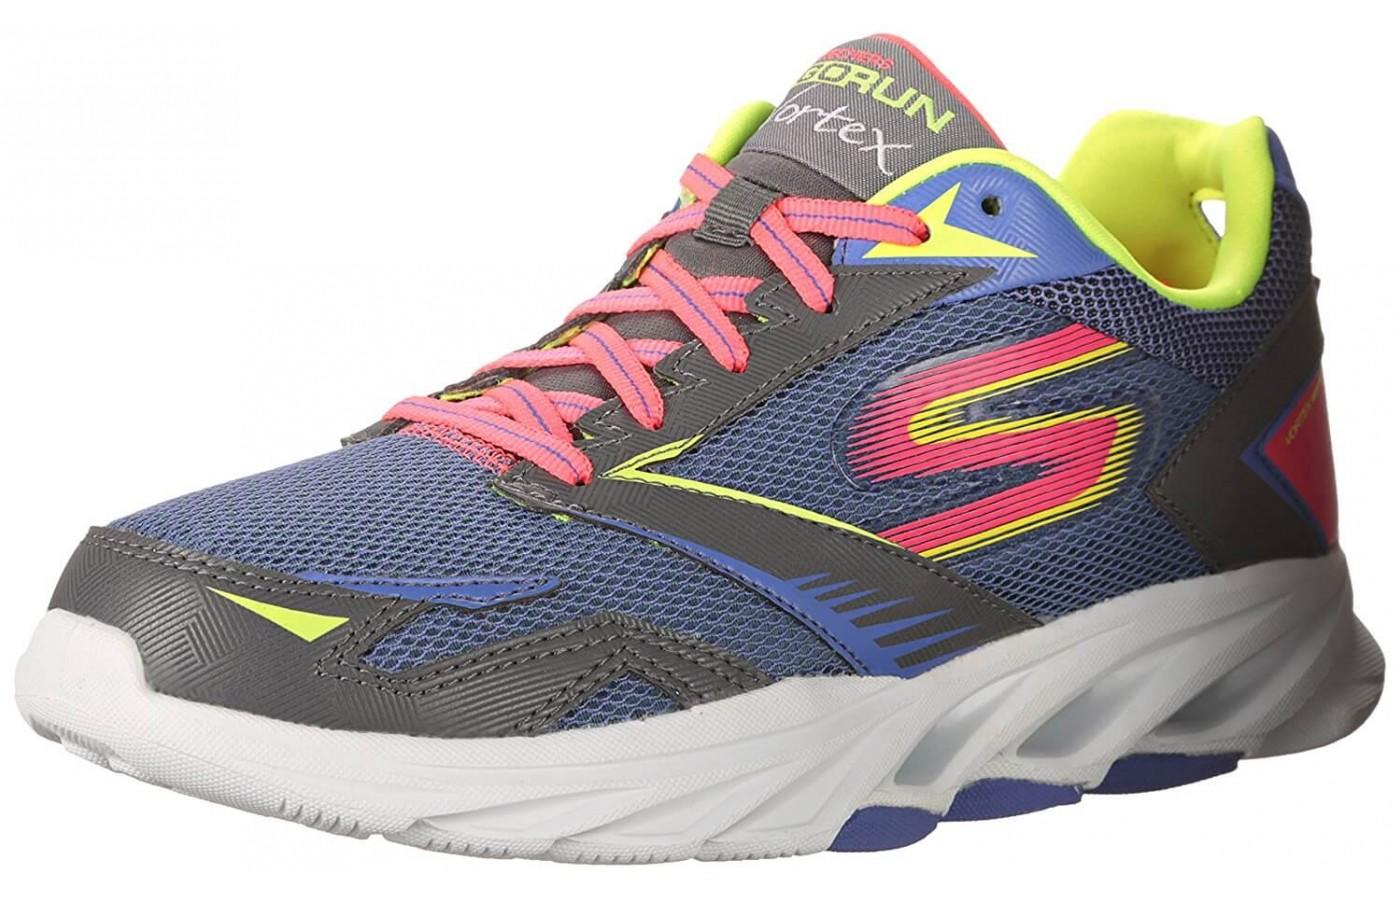 Skechers GoRun Vortex comes in a cool 80s-style color option